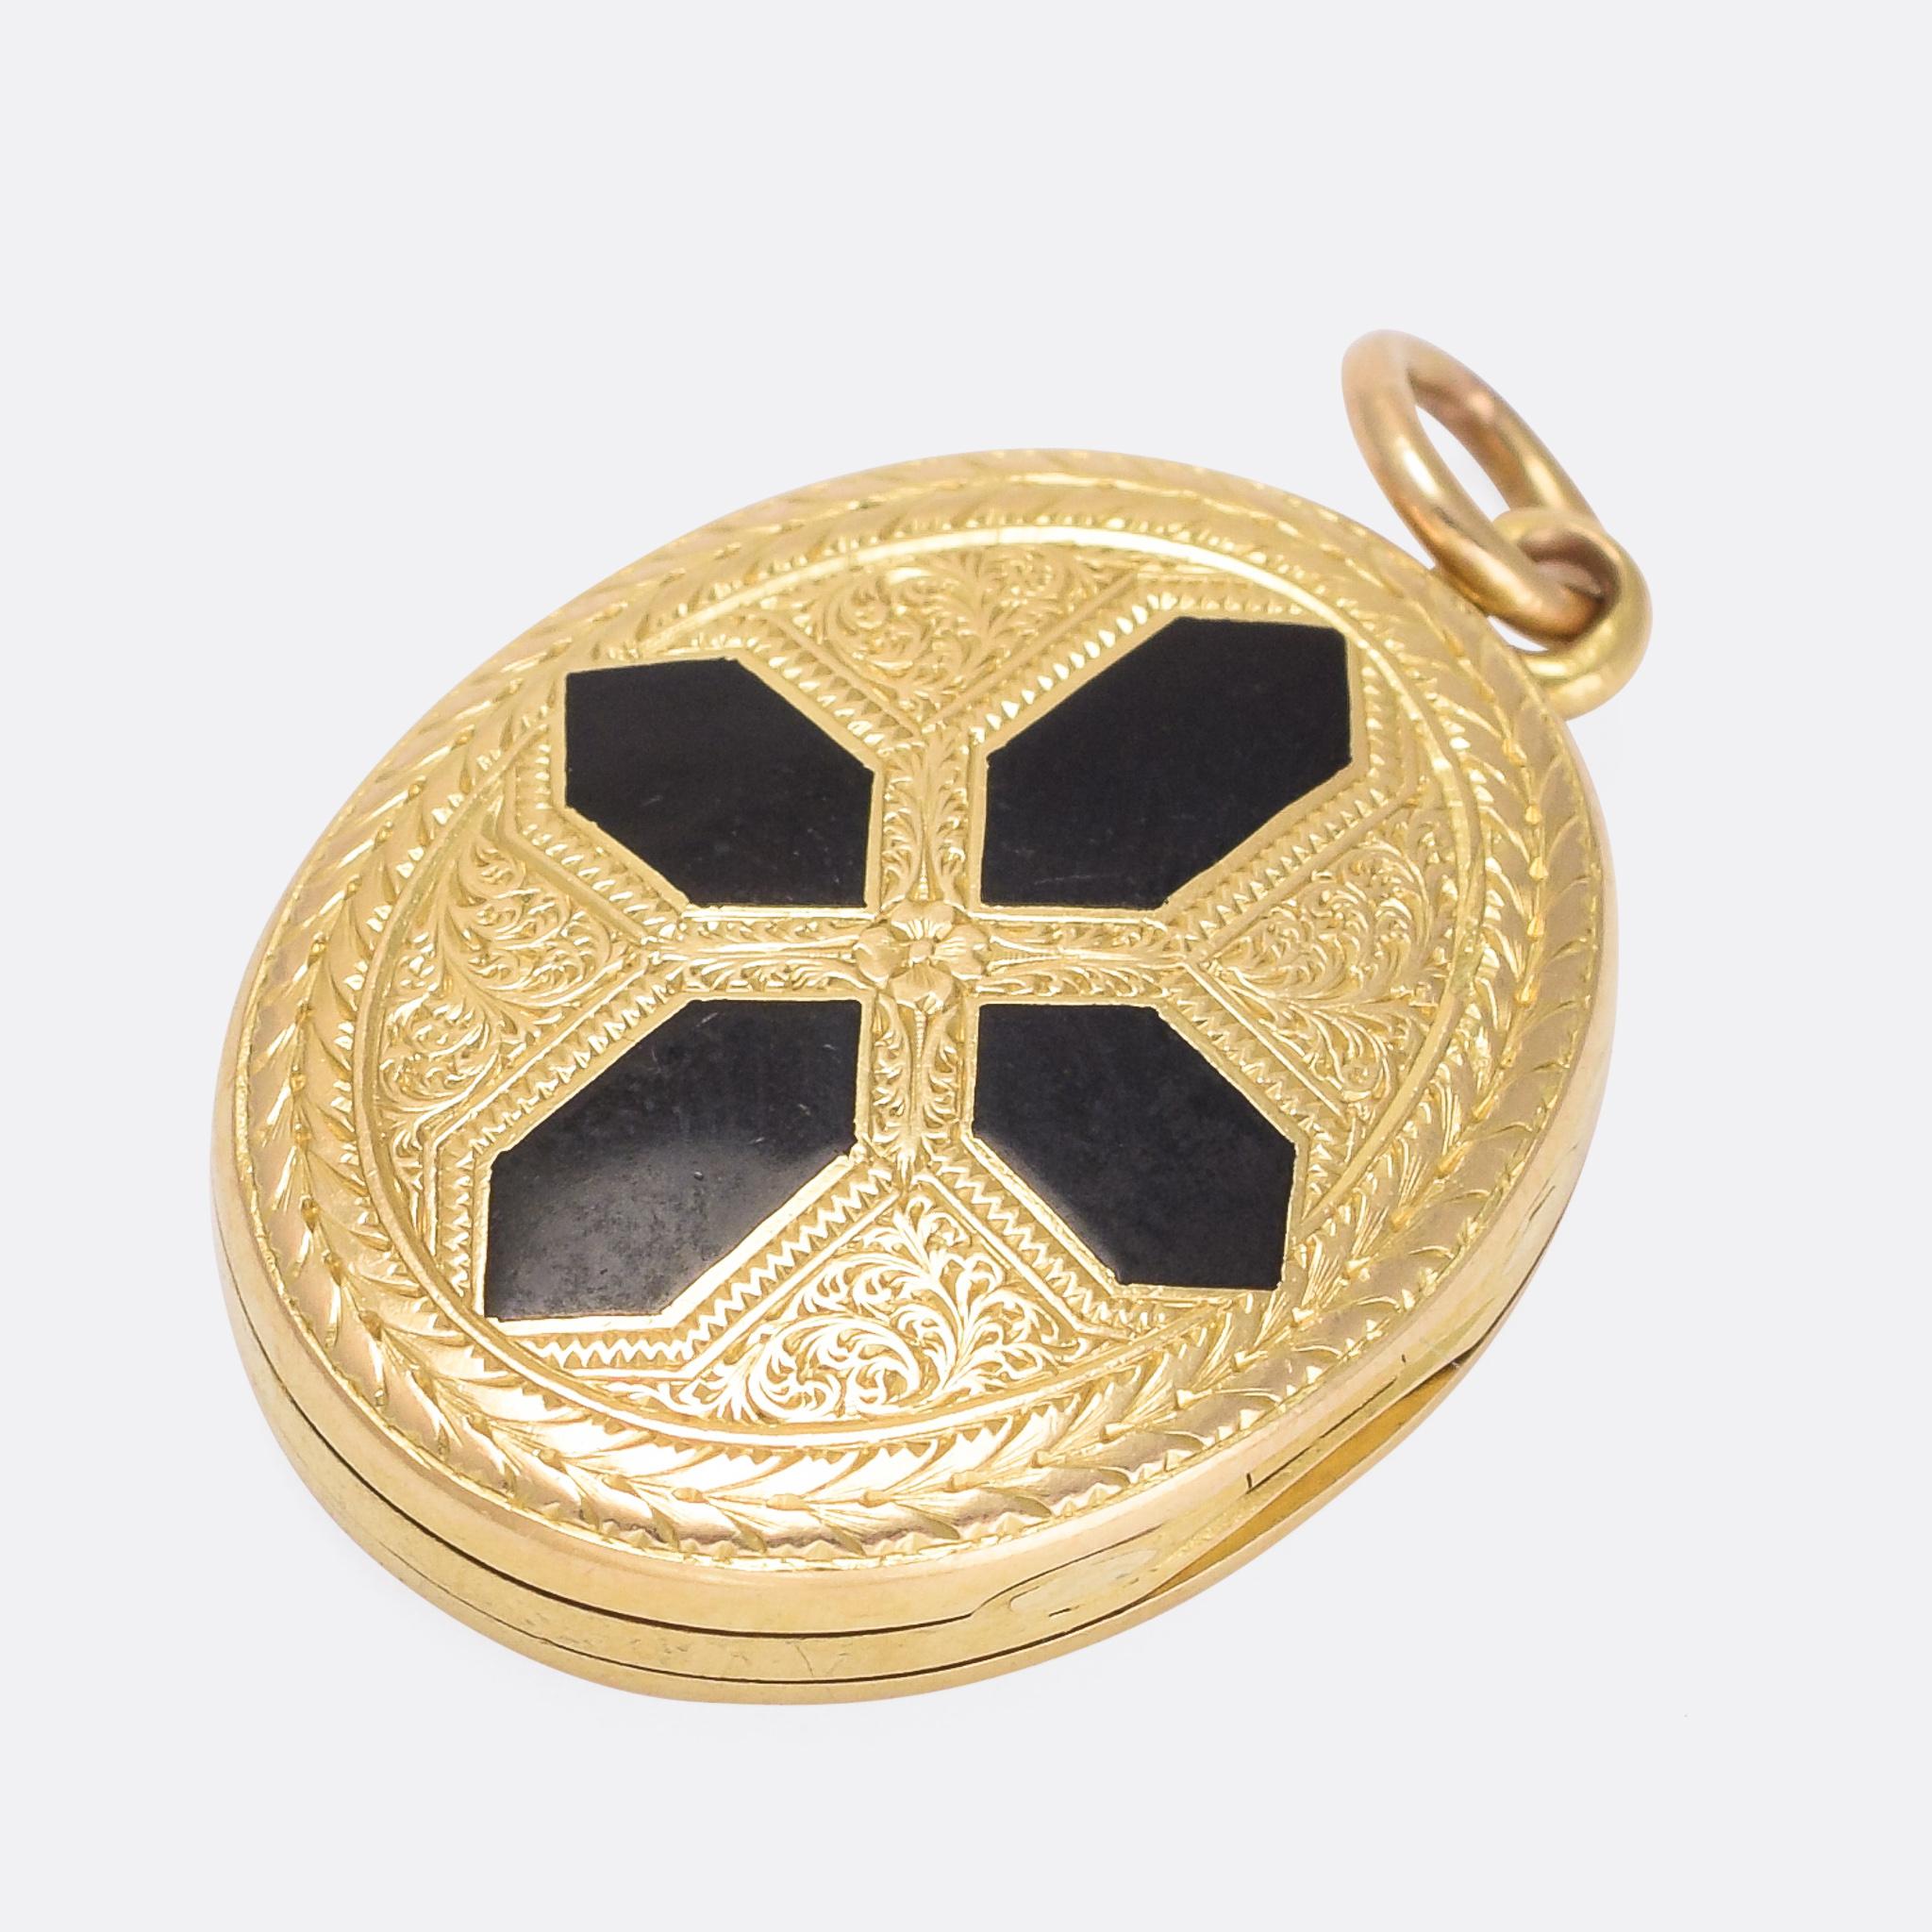 A cool antique double locket dating from 1859. It's hinged on both sides, meaning that both the front and back can open independently of one another - quite an unusual feature. The front is intricately hand-chased with a black enamel cross motif,